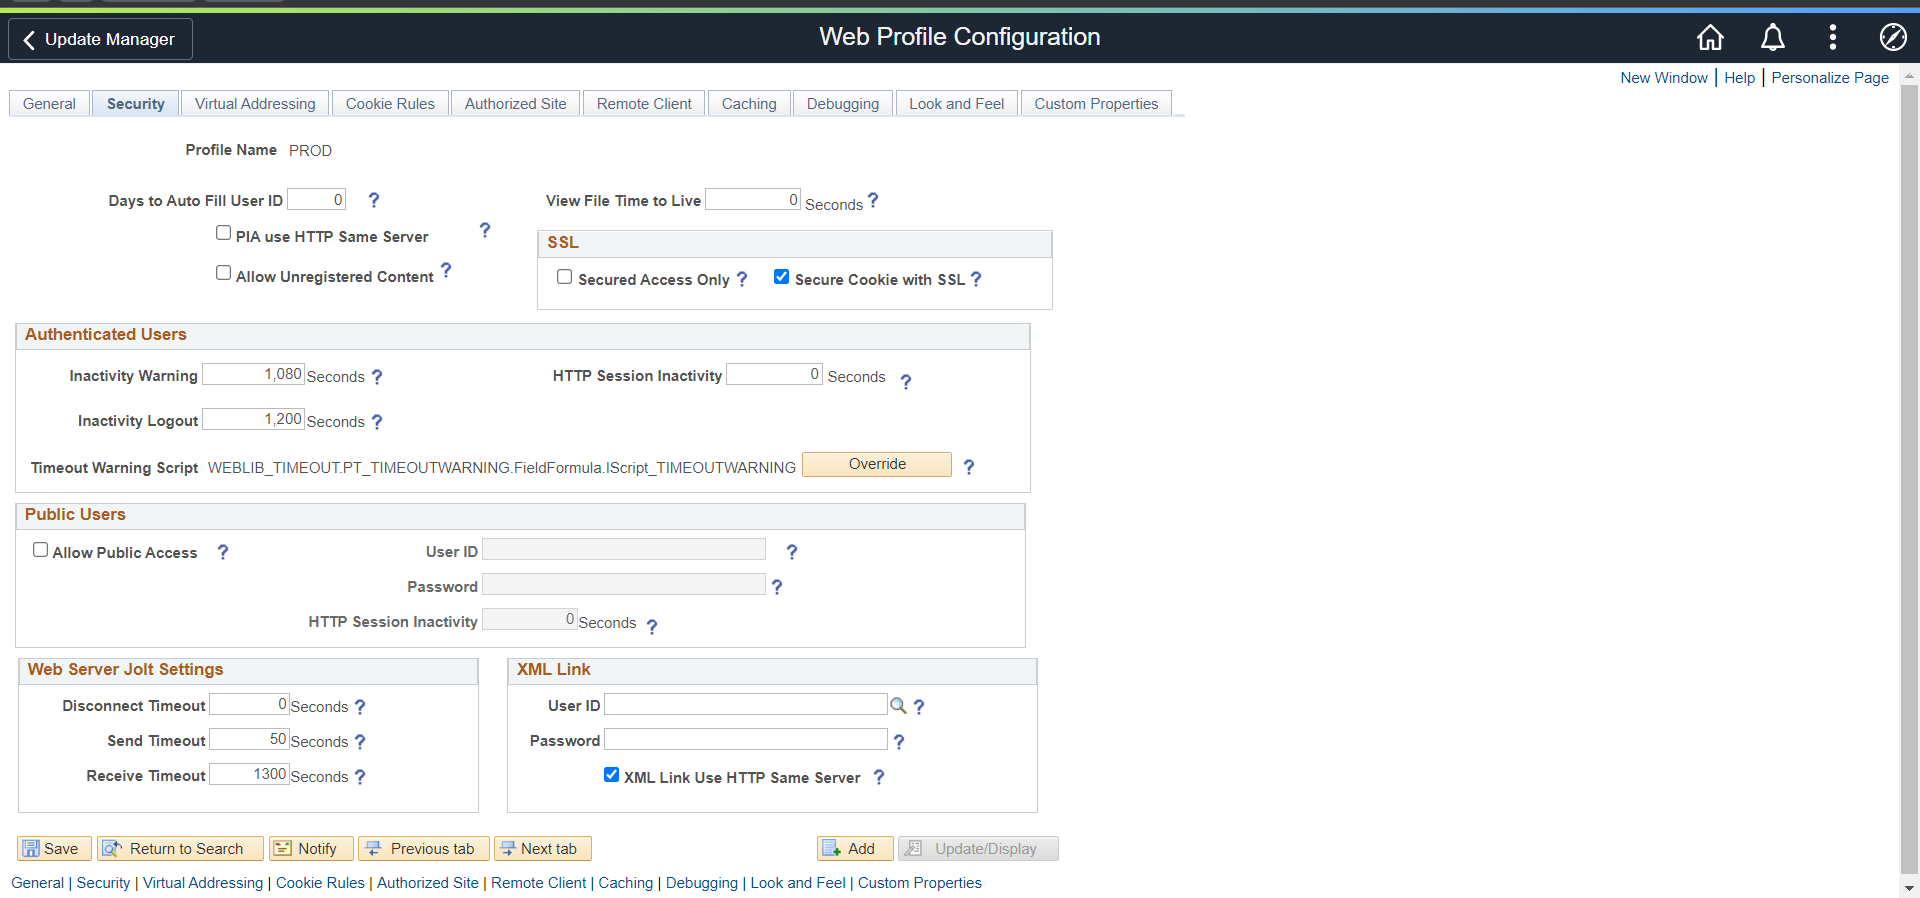 Web Profile Configuration for PeopleSoft SSO